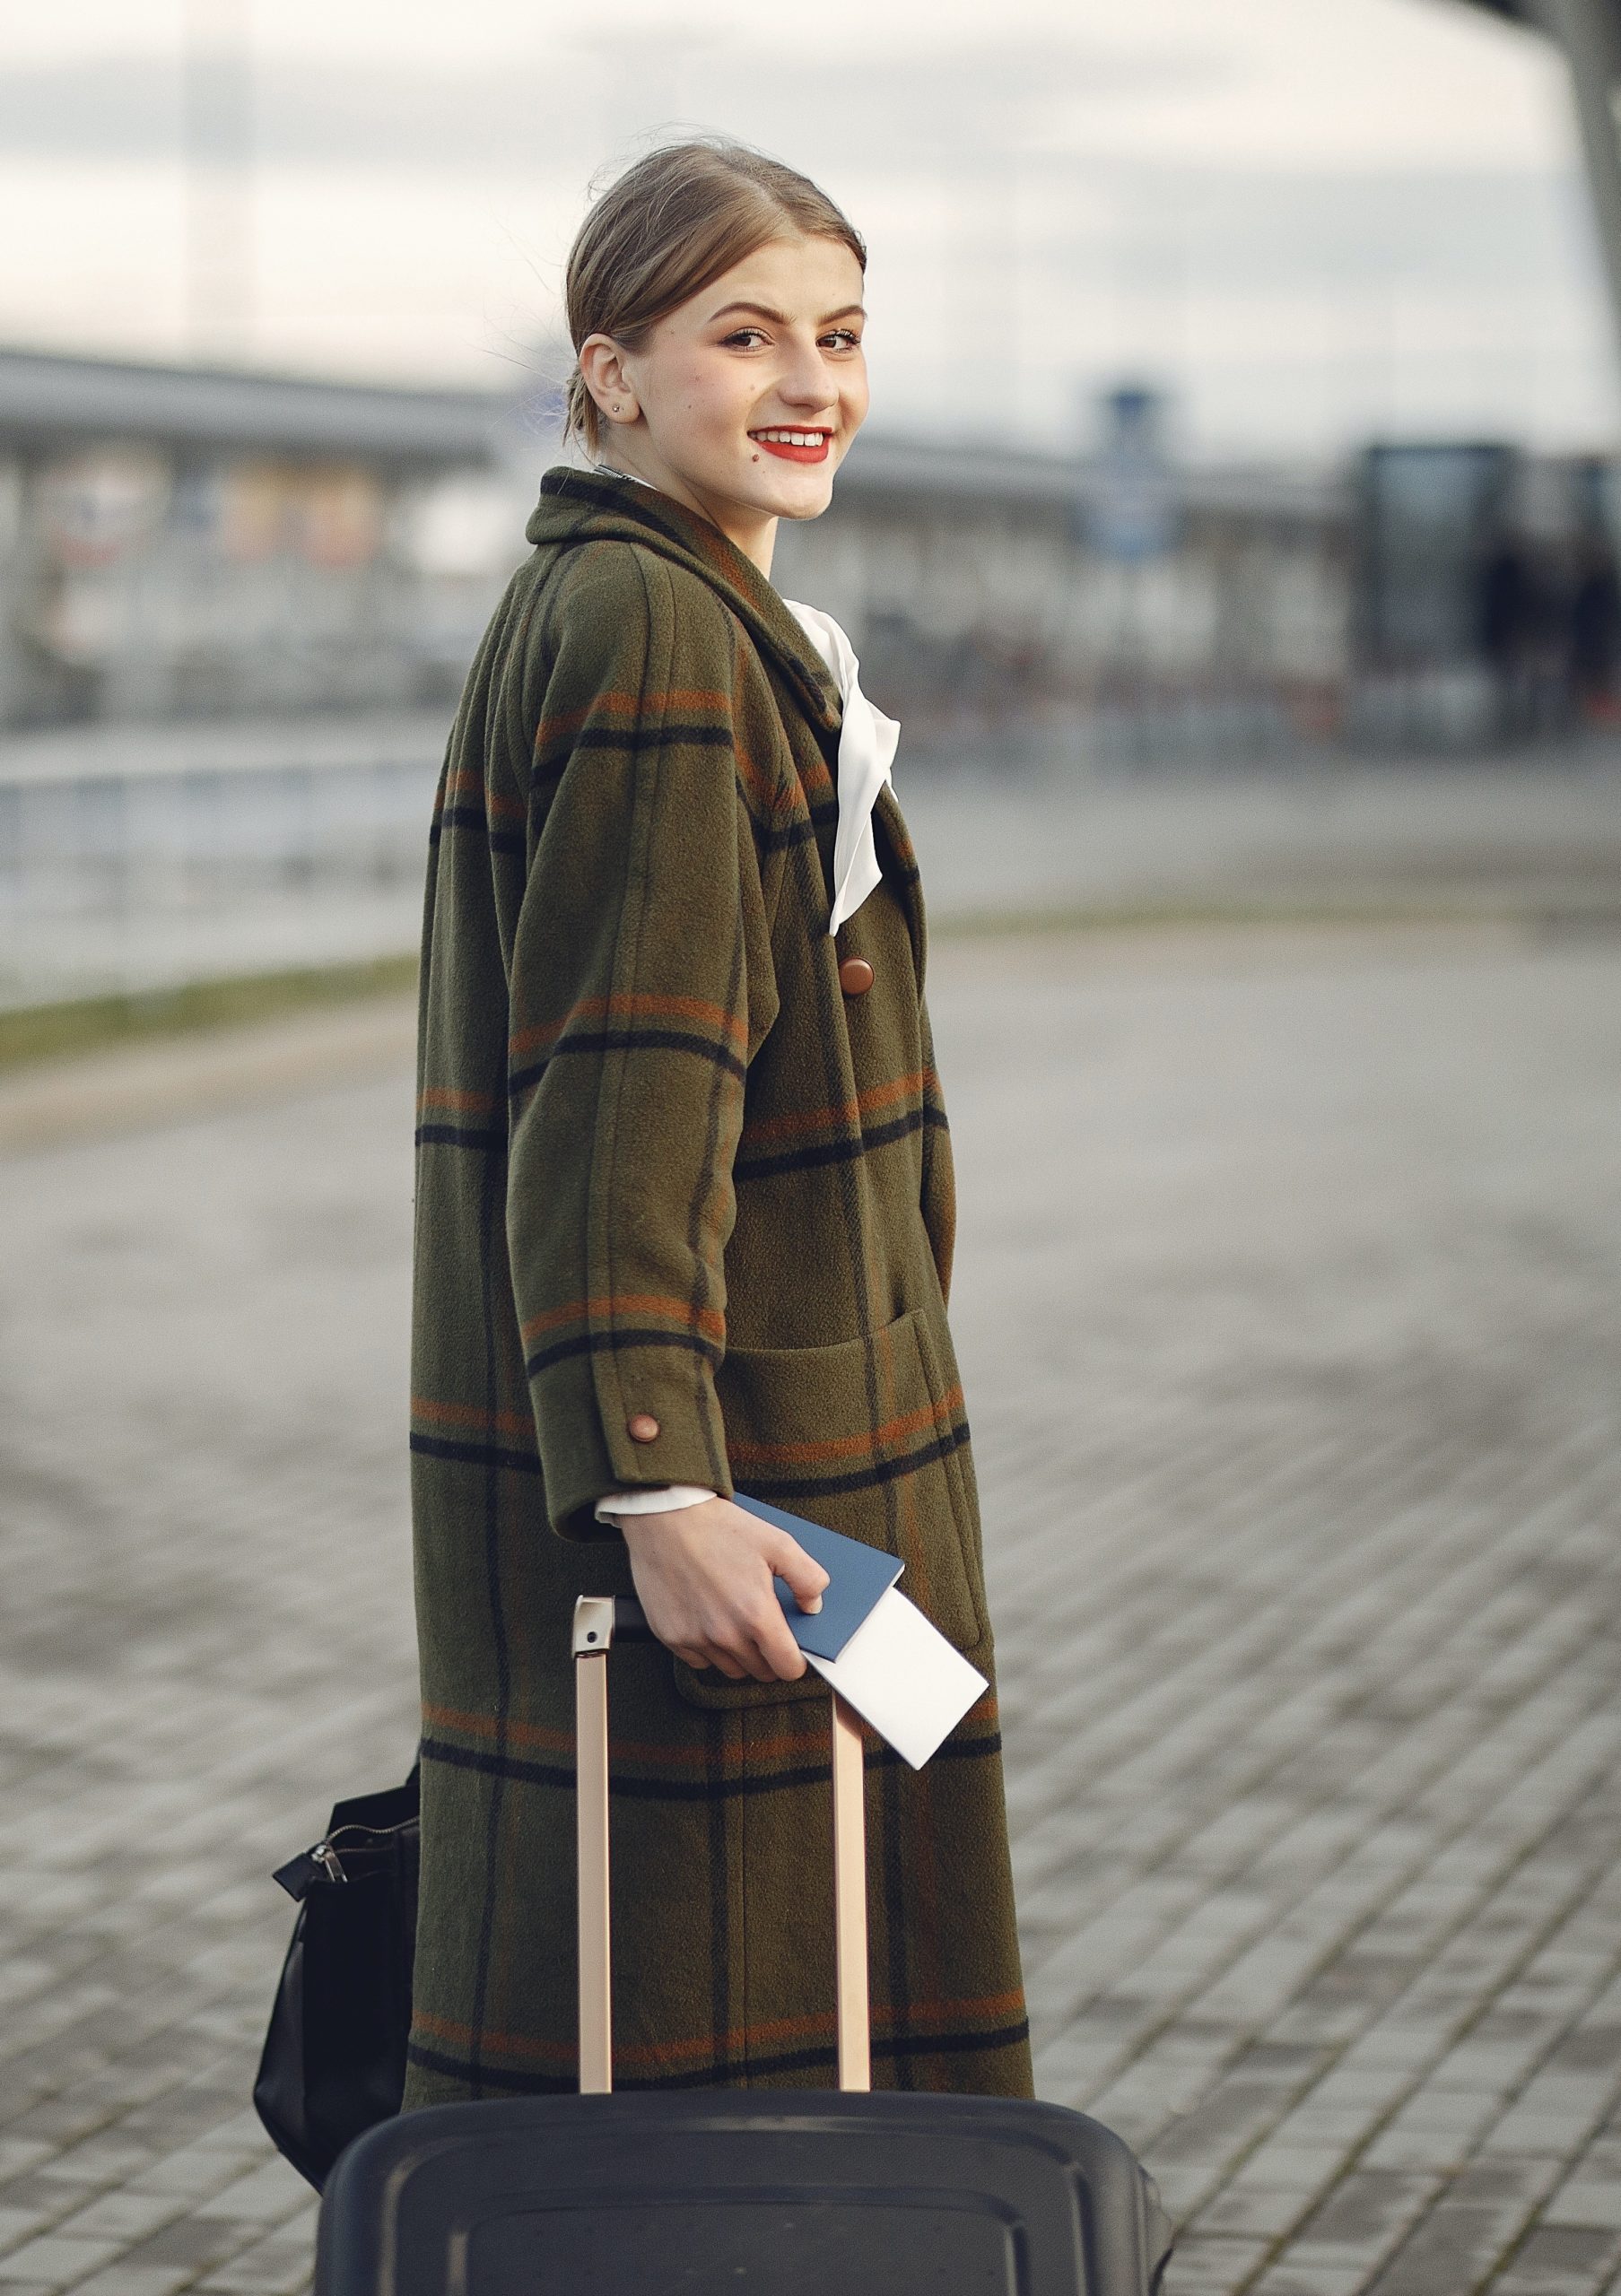 woman in a coat holding her passport, boarding pass and luggage